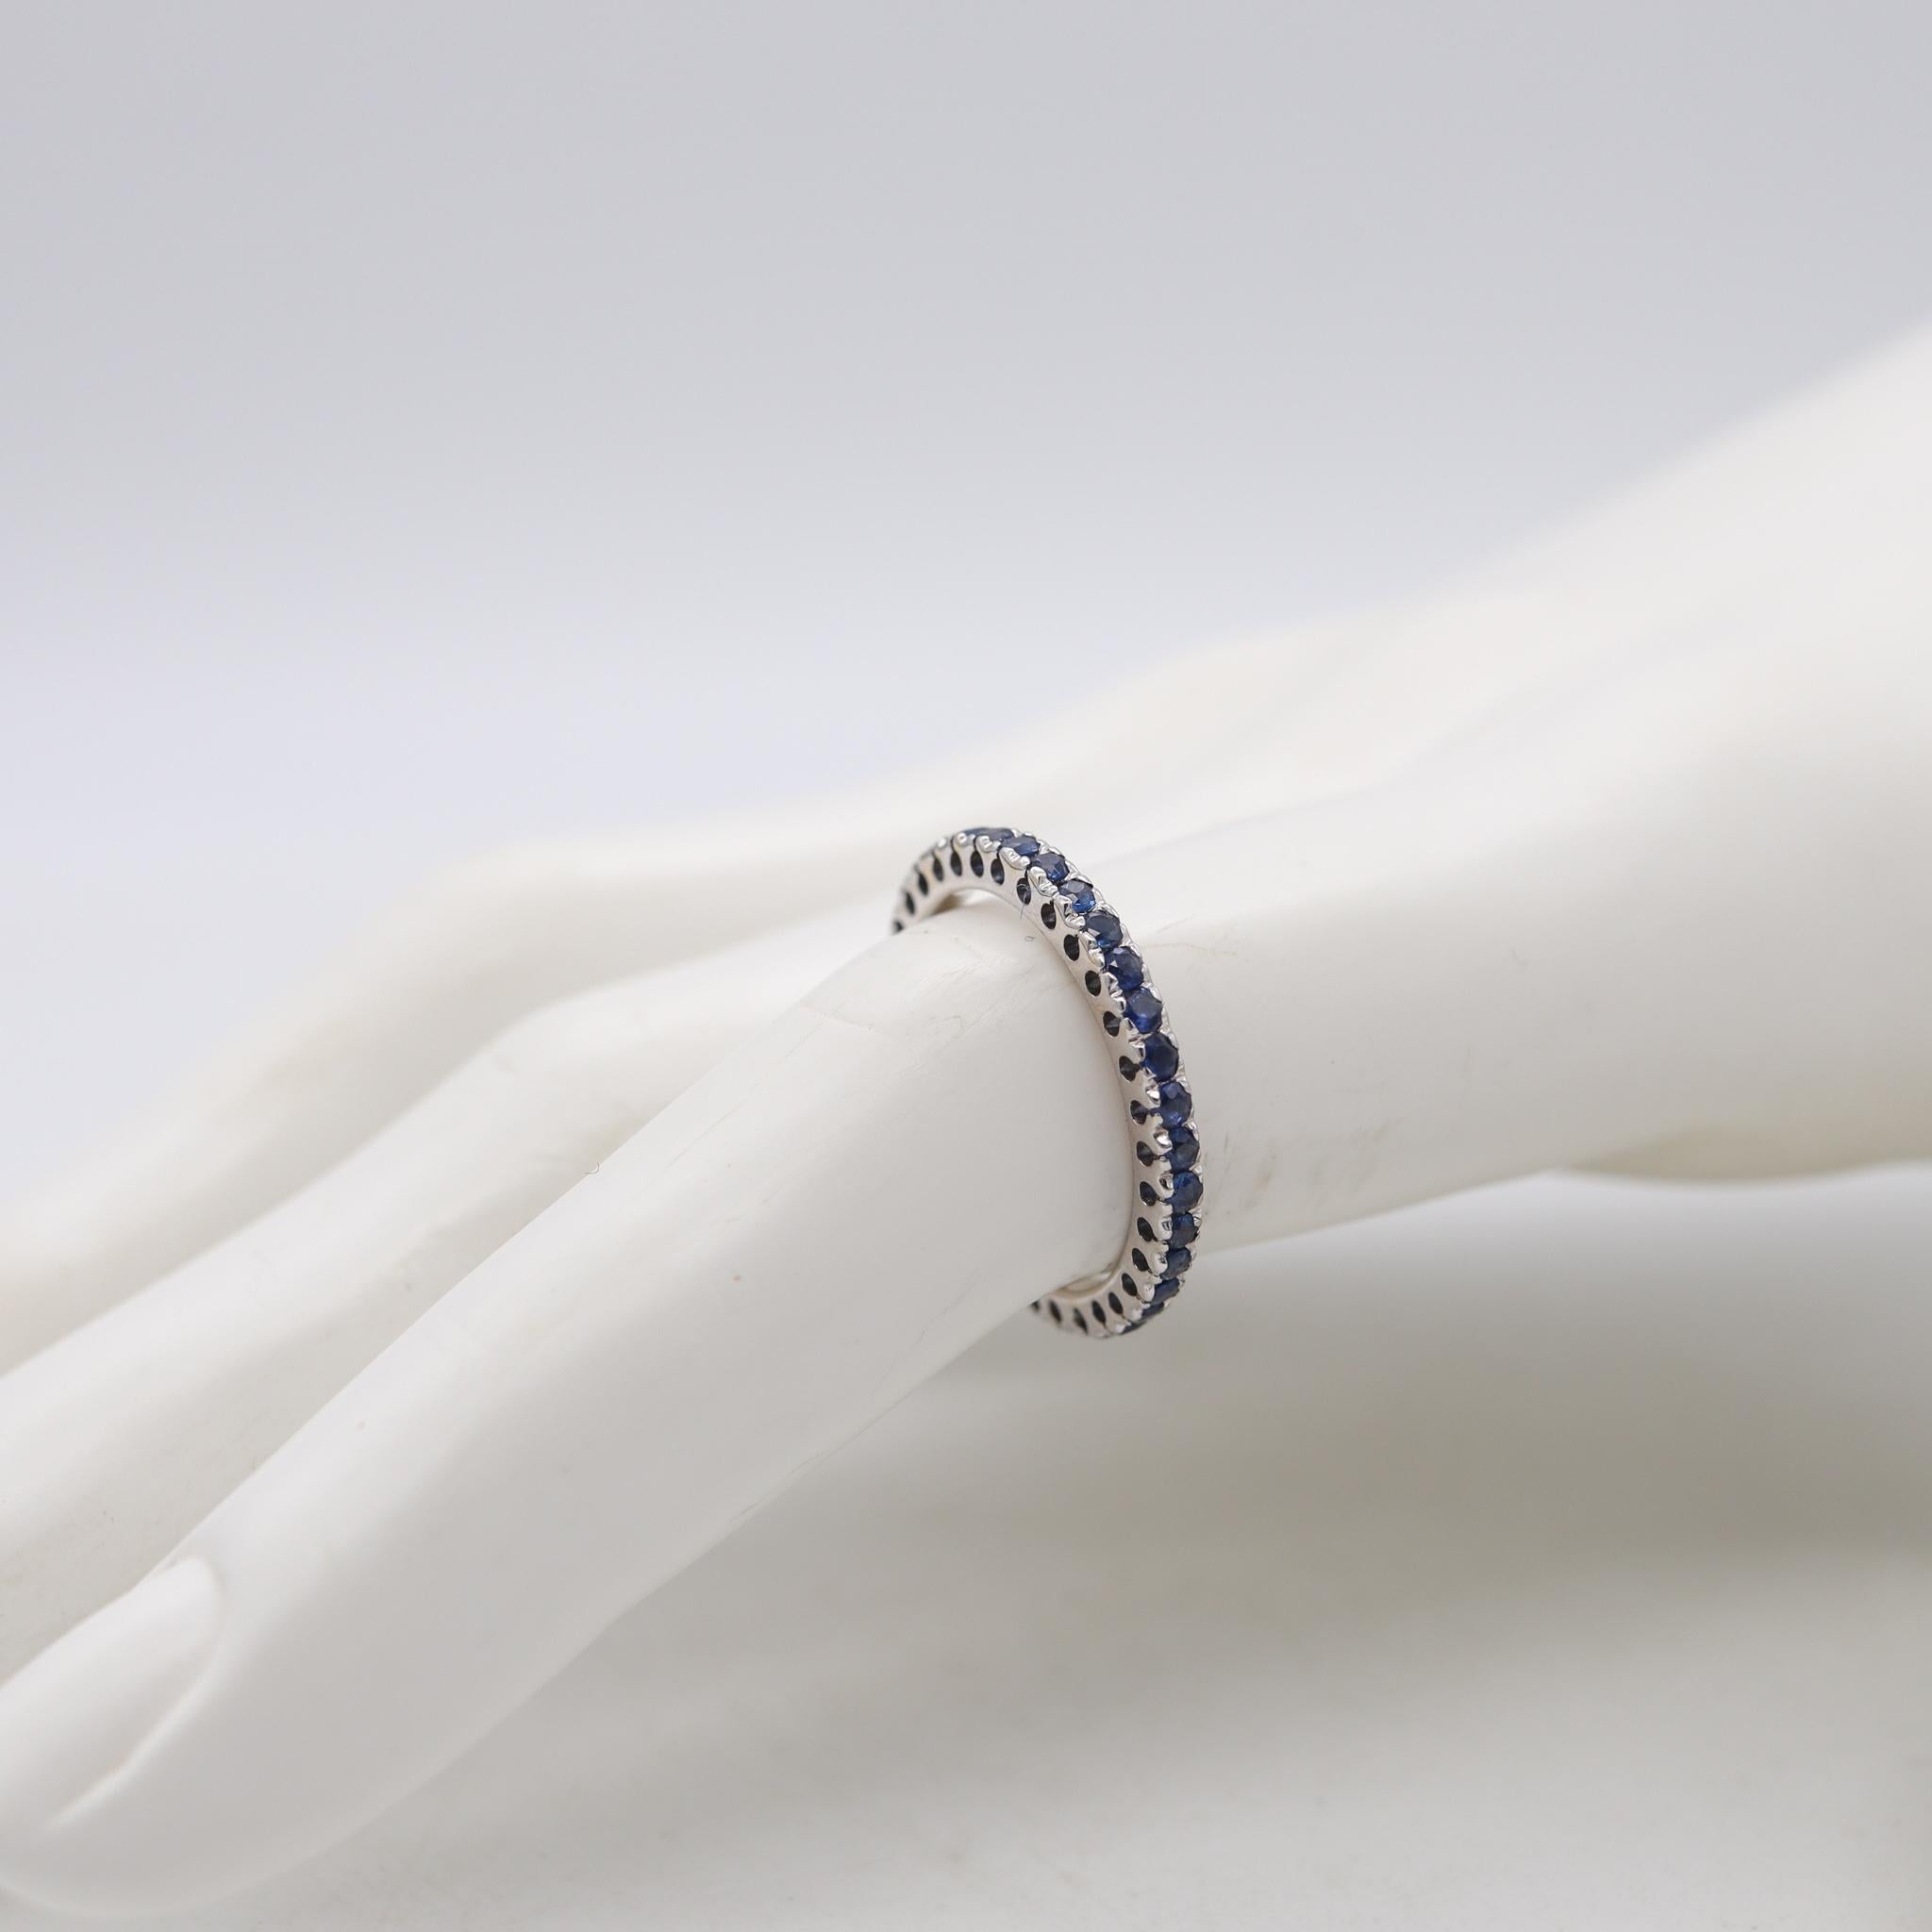 Eternity Modern Ring Band 18Kt White Gold With 1.08 Cts Of Ceylon Blue Sapphires For Sale 1